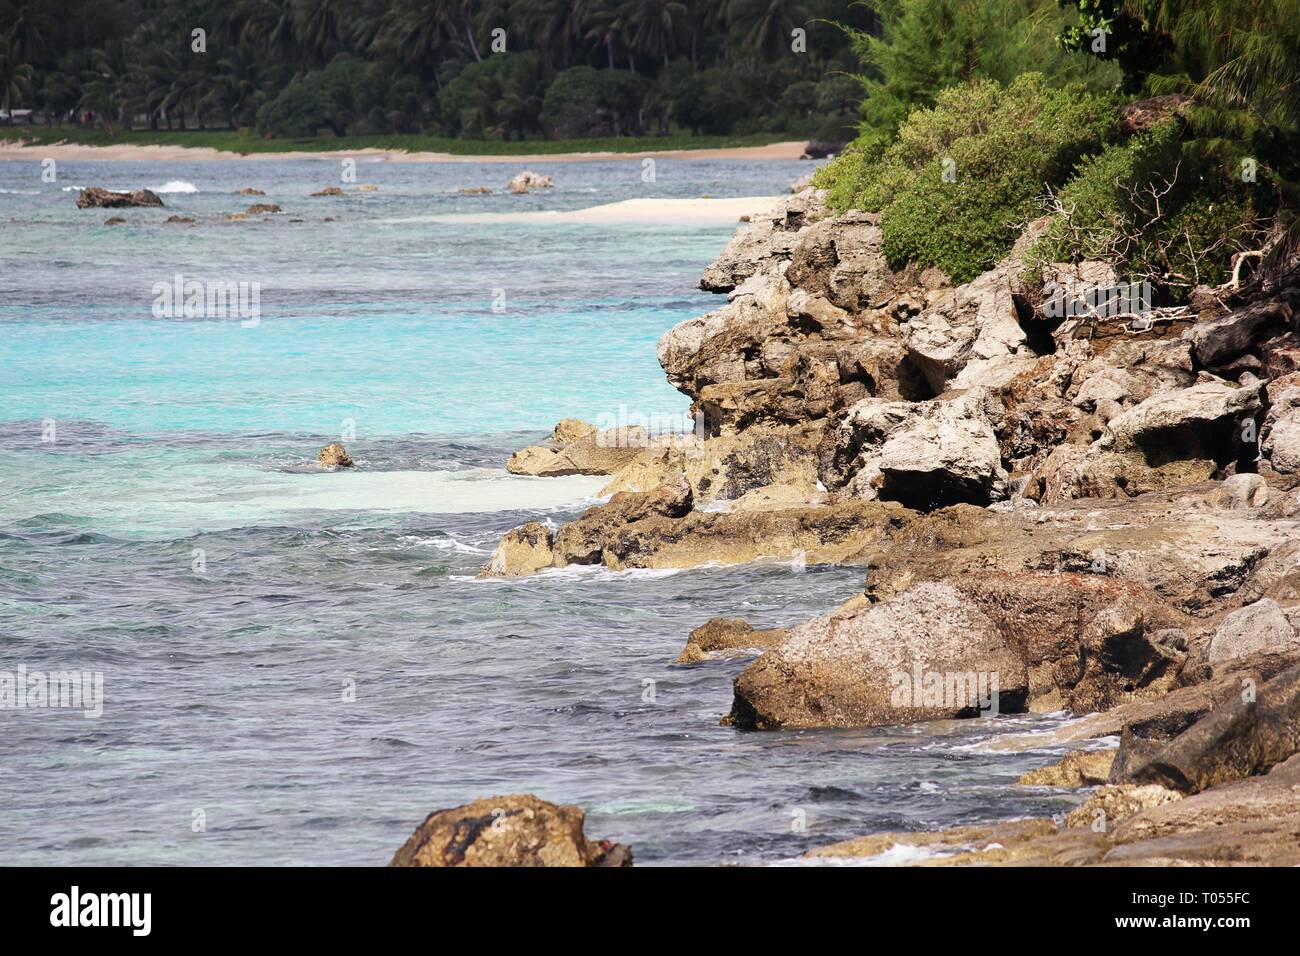 Different shades of blue waters with sharp rocky corals in a tropical beach Inarahan village on the southeastern coast of Guam Stock Photo